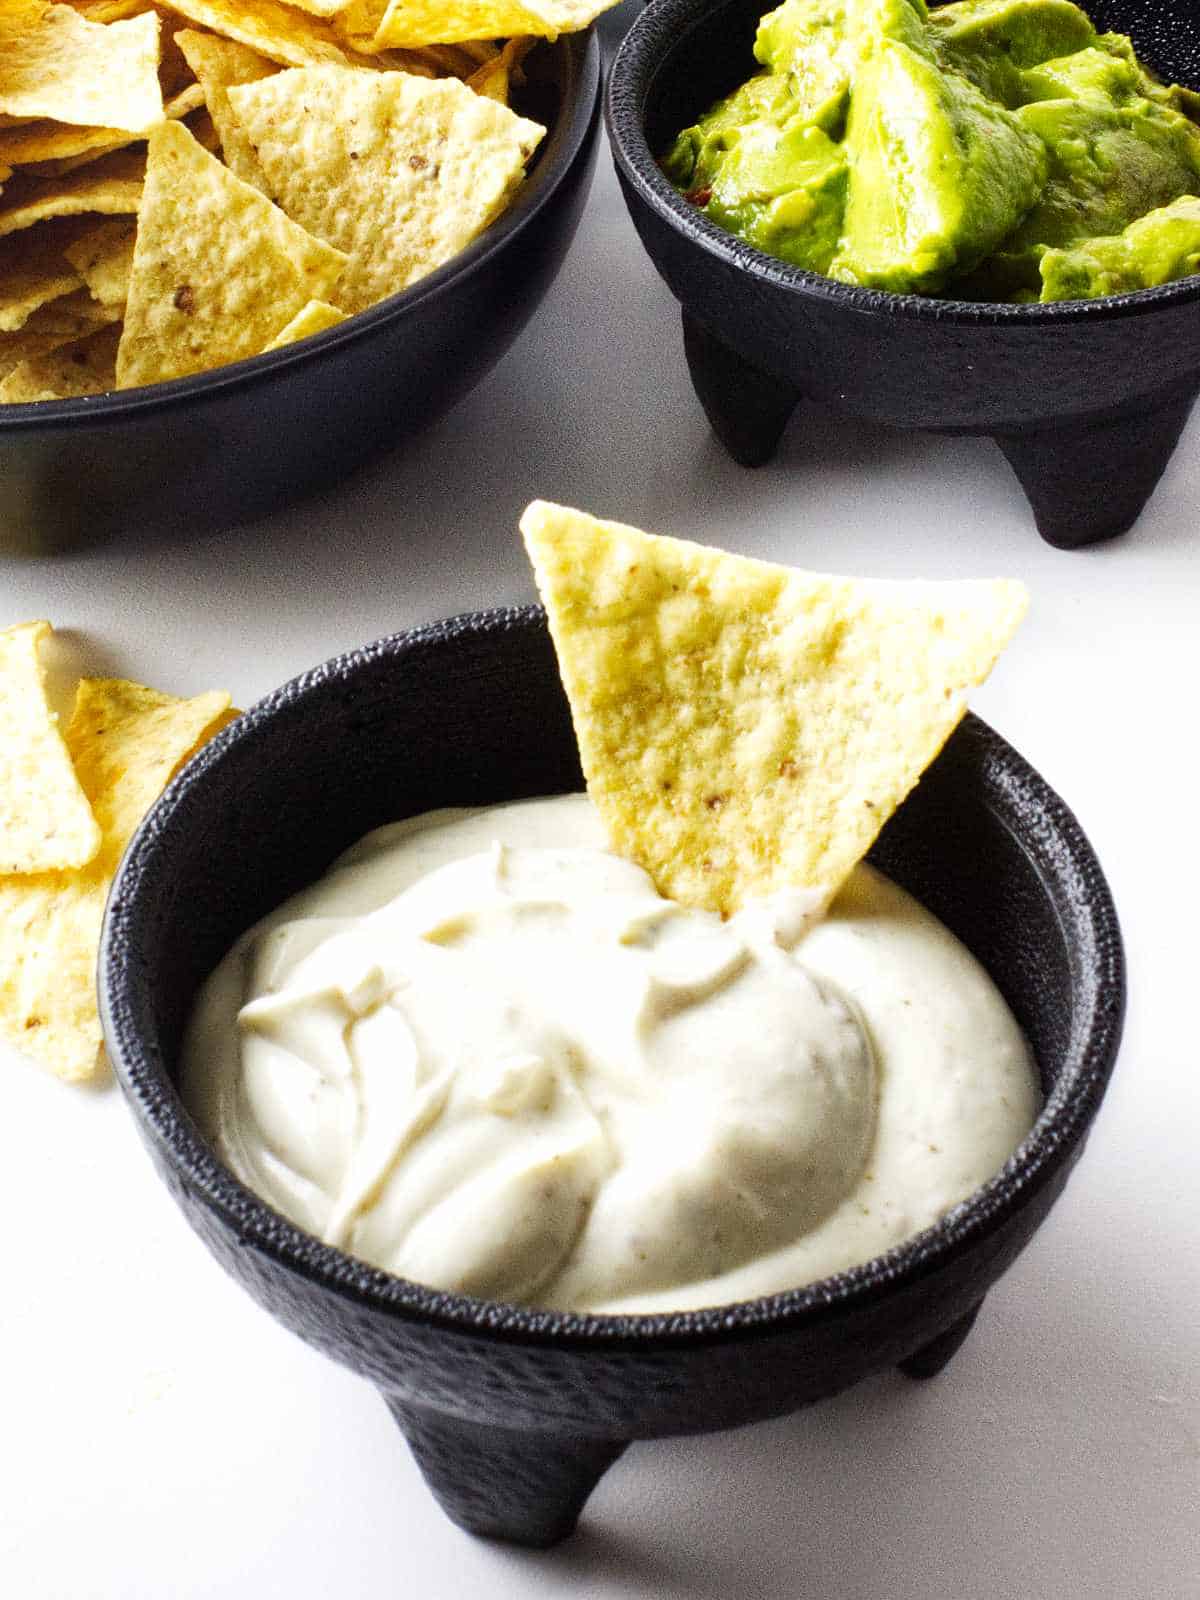 chips and dips in small bowls.